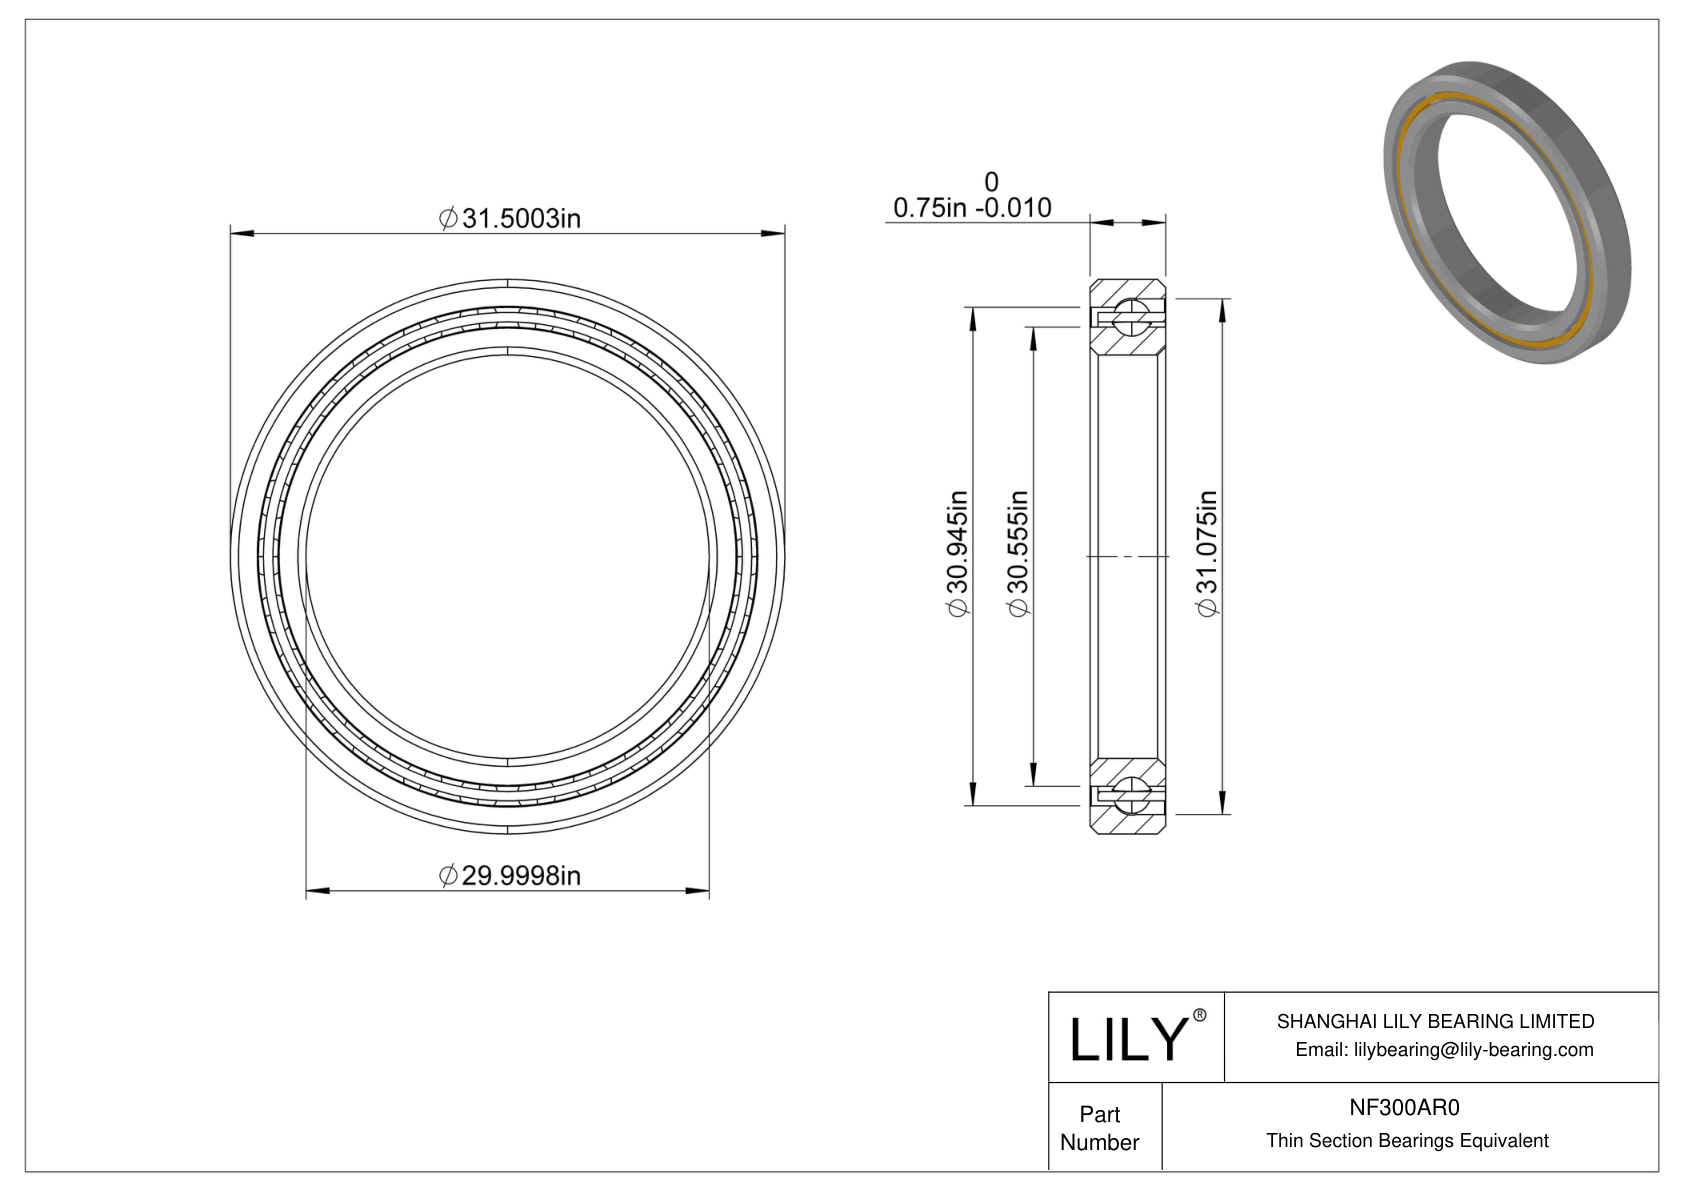 NF300AR0 Constant Section (CS) Bearings cad drawing